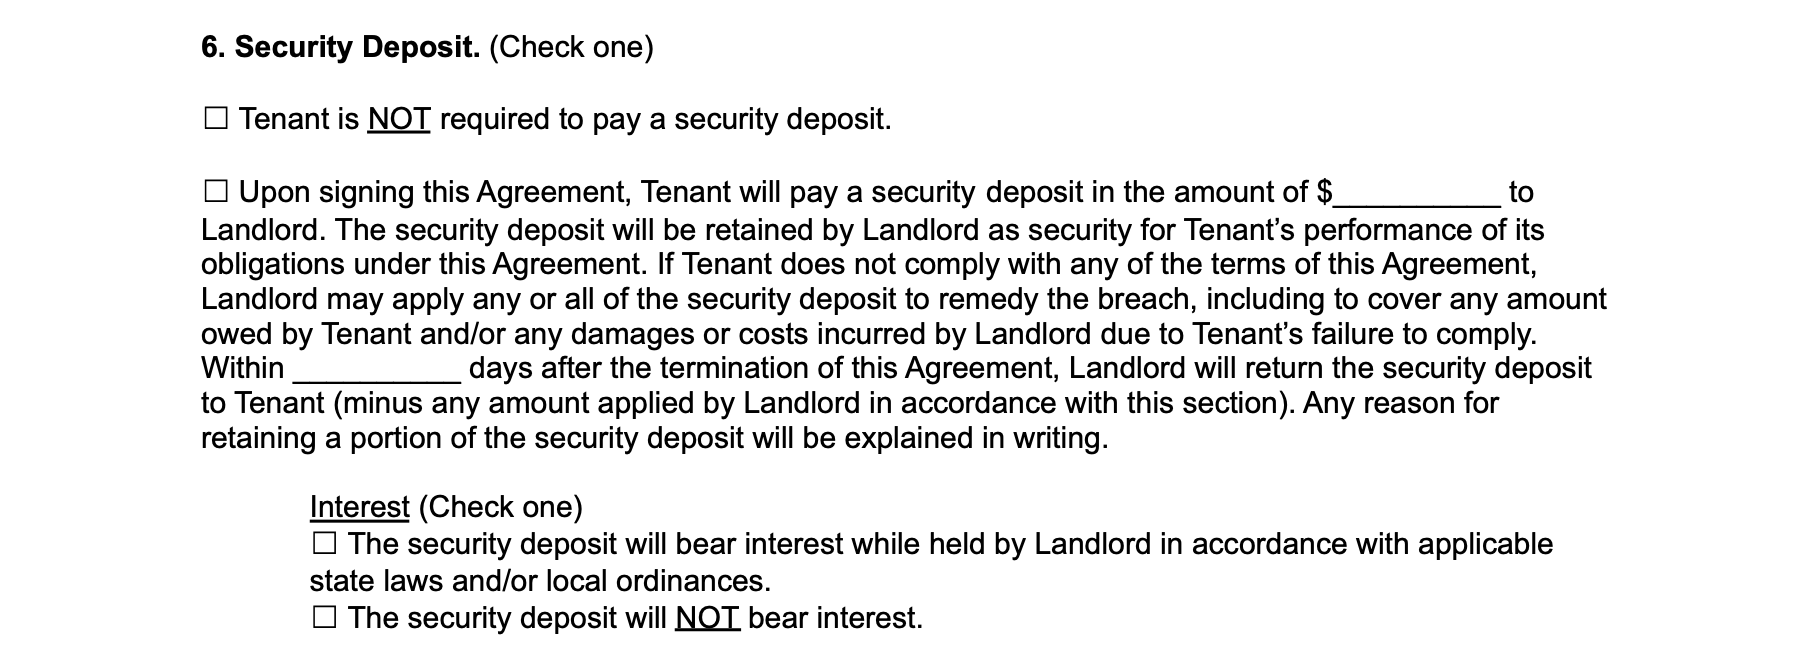 land lease agreement security deposit